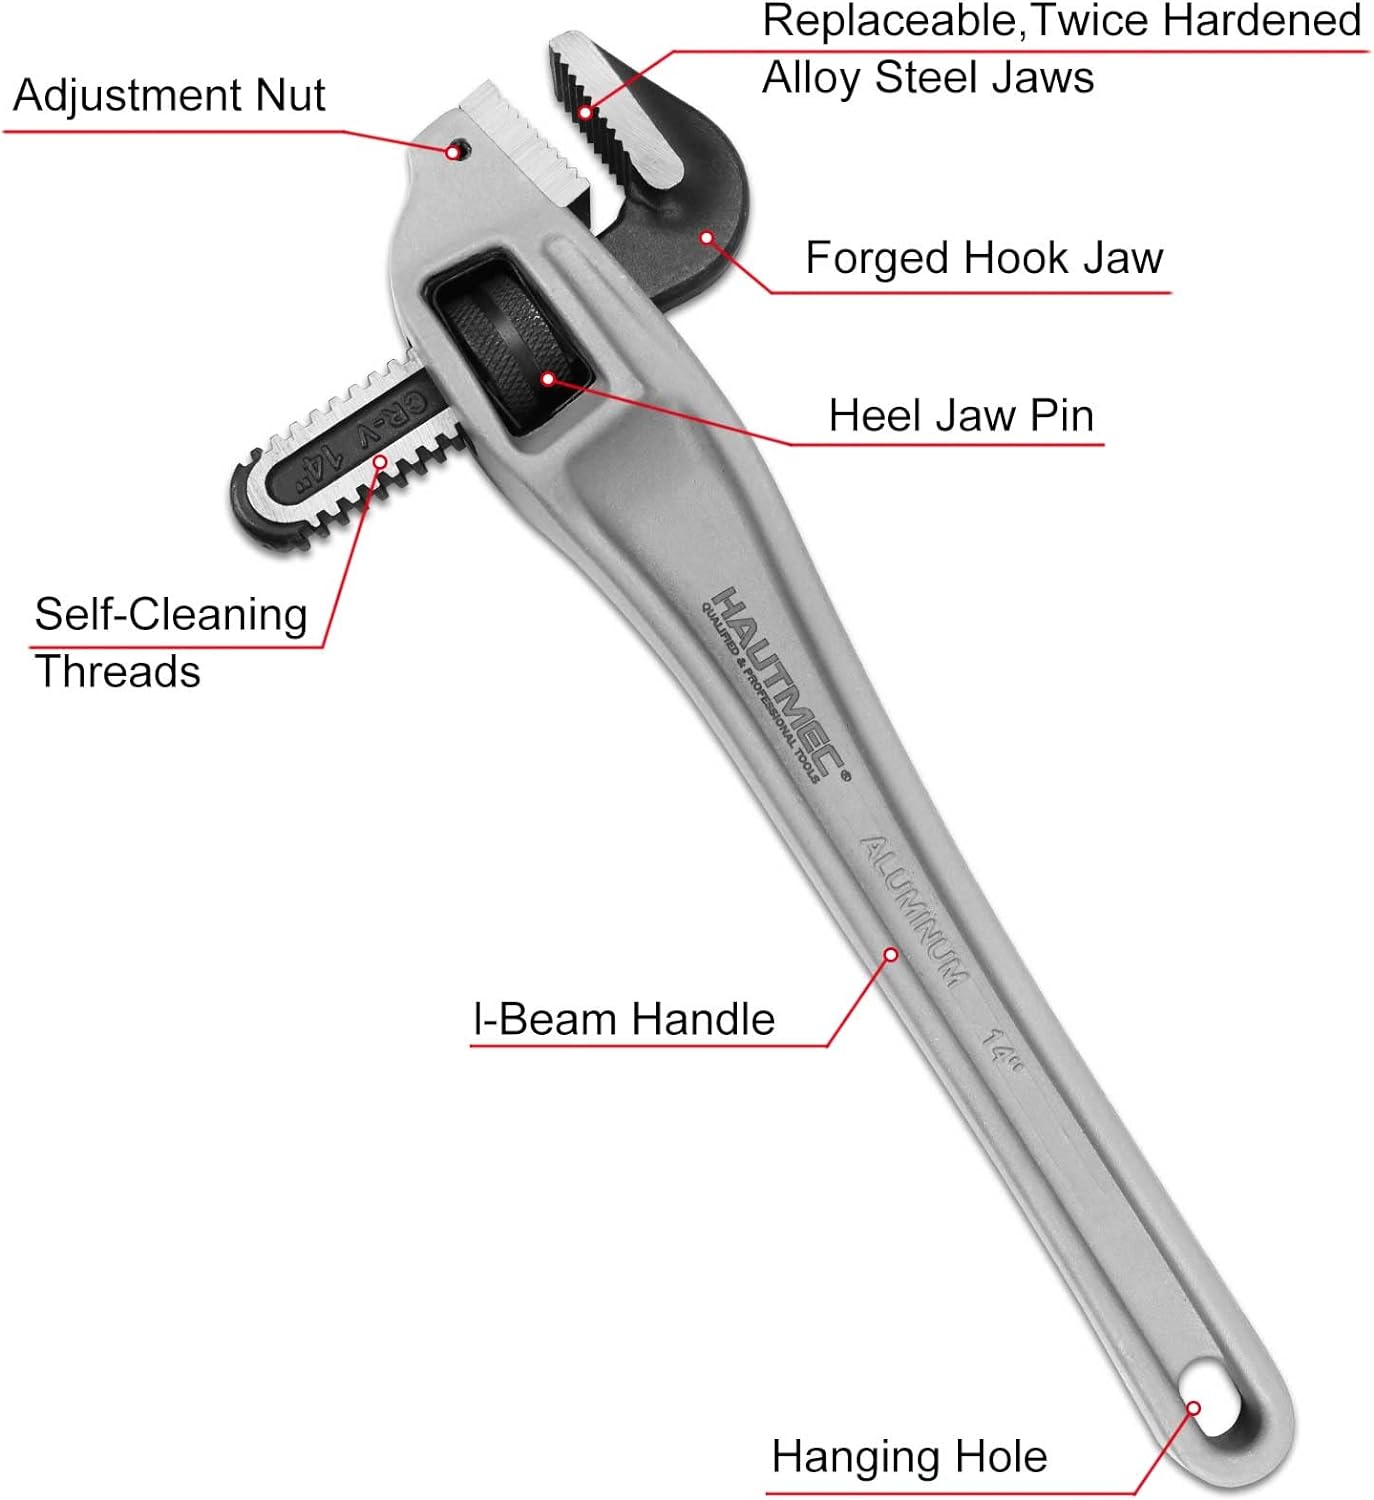 HAUTMEC 14 Inch Aluminum Offset Pipe Wrench, Heavy Duty Adjustable Plumbing Wrench, 2" Jaw Capacity, 40% Lighter Drop Forged Construction, for Use in Tight Spaces HT0189